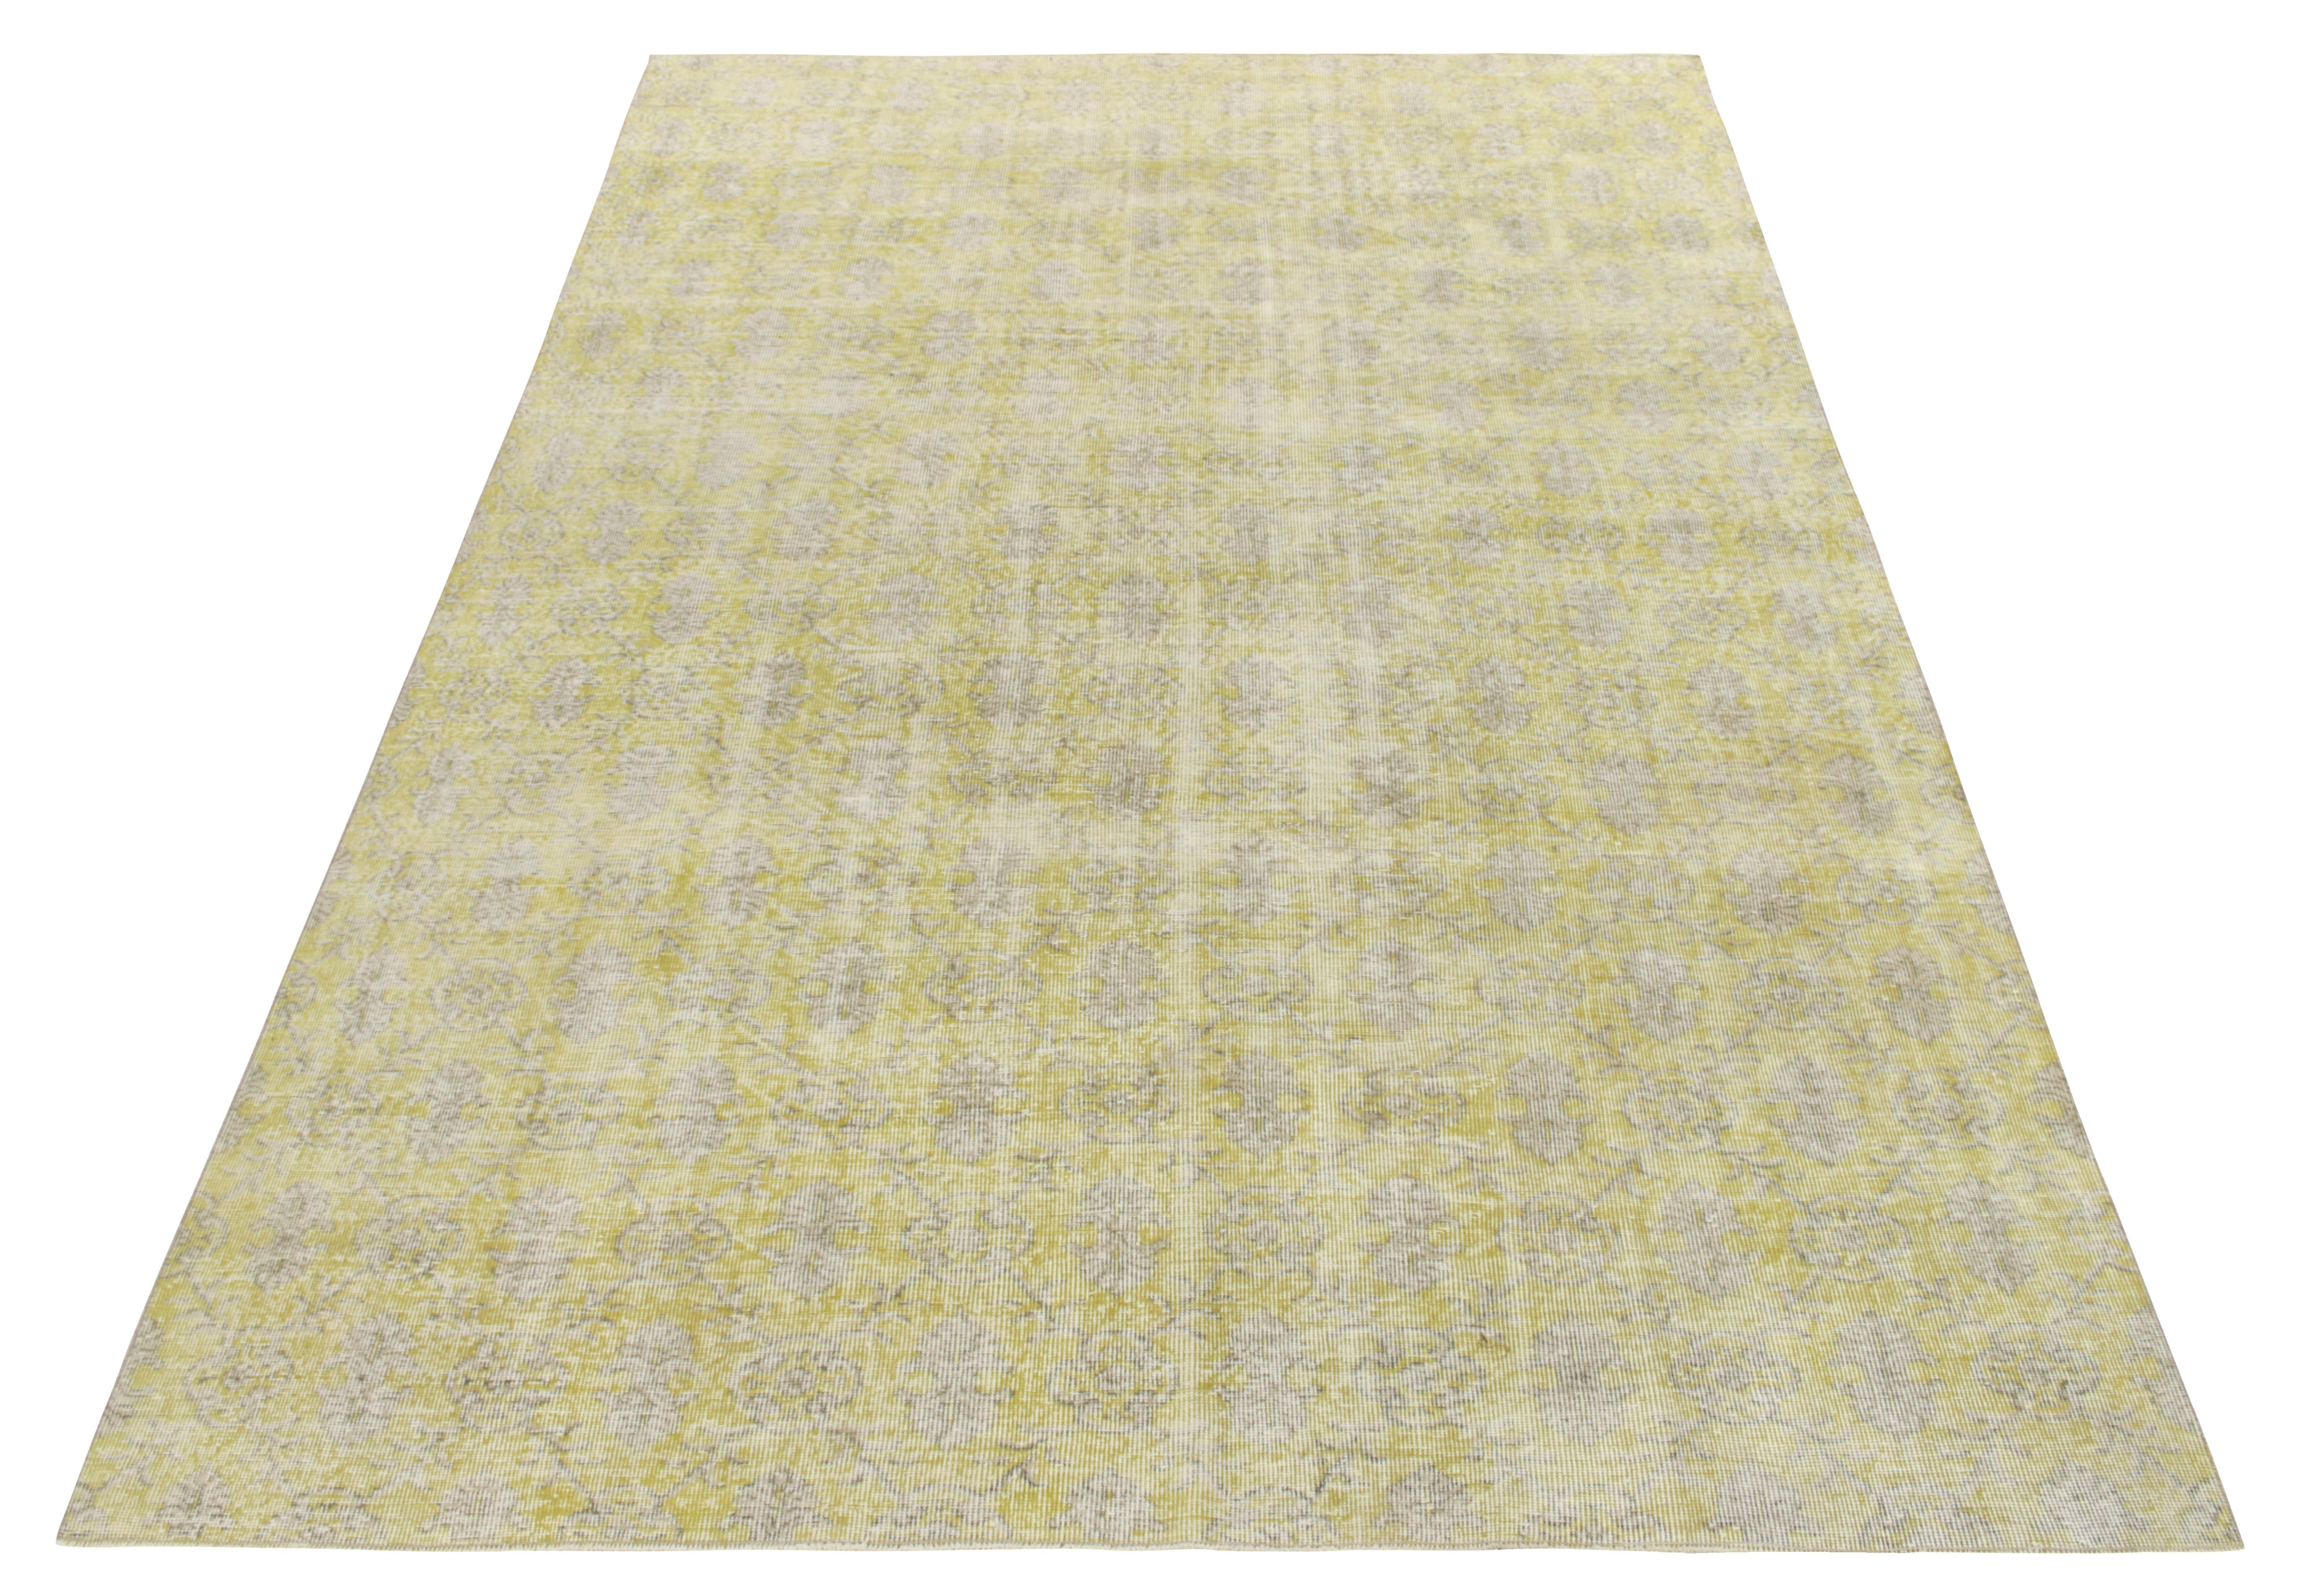 Hand-knotted in fine wool, this 7x11 vintage mid-century rug enjoys a subtle floral pattern in lemon and grey tones, perfectly complementing the distressed vibe of this mid century modern piece. Coming from one of the most venerated